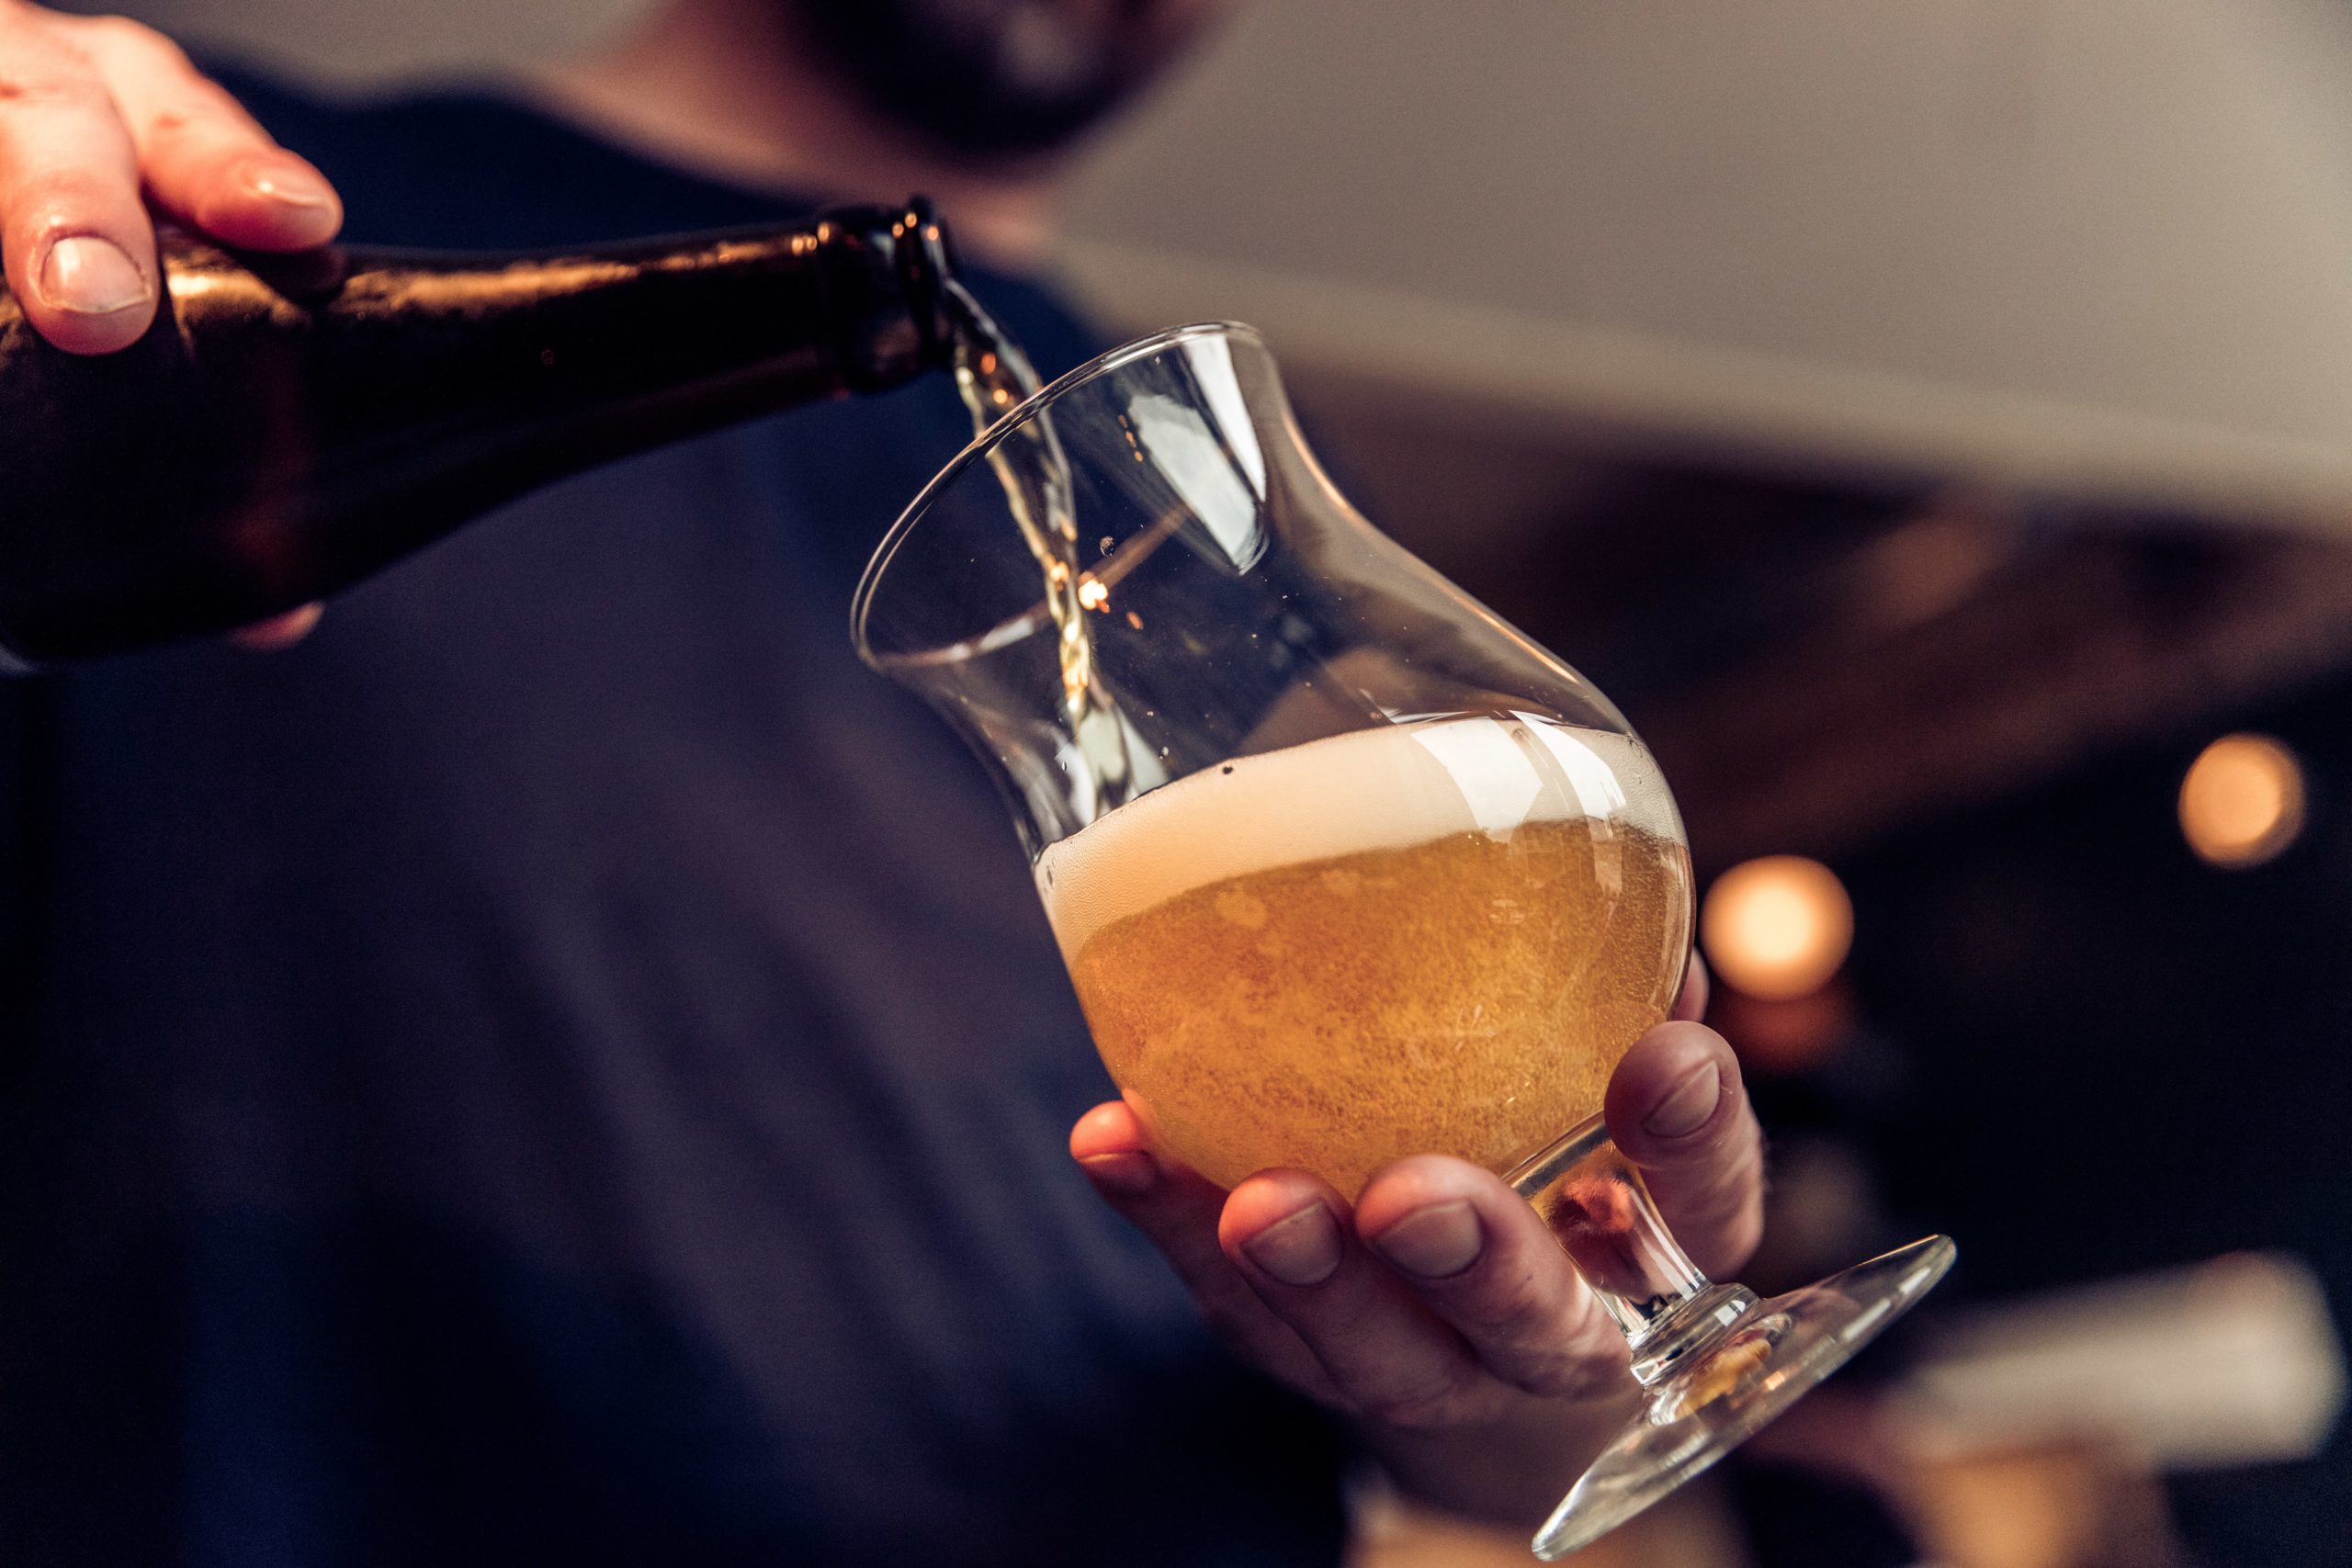 Midsection Of Man Filling Wineglass With Beer